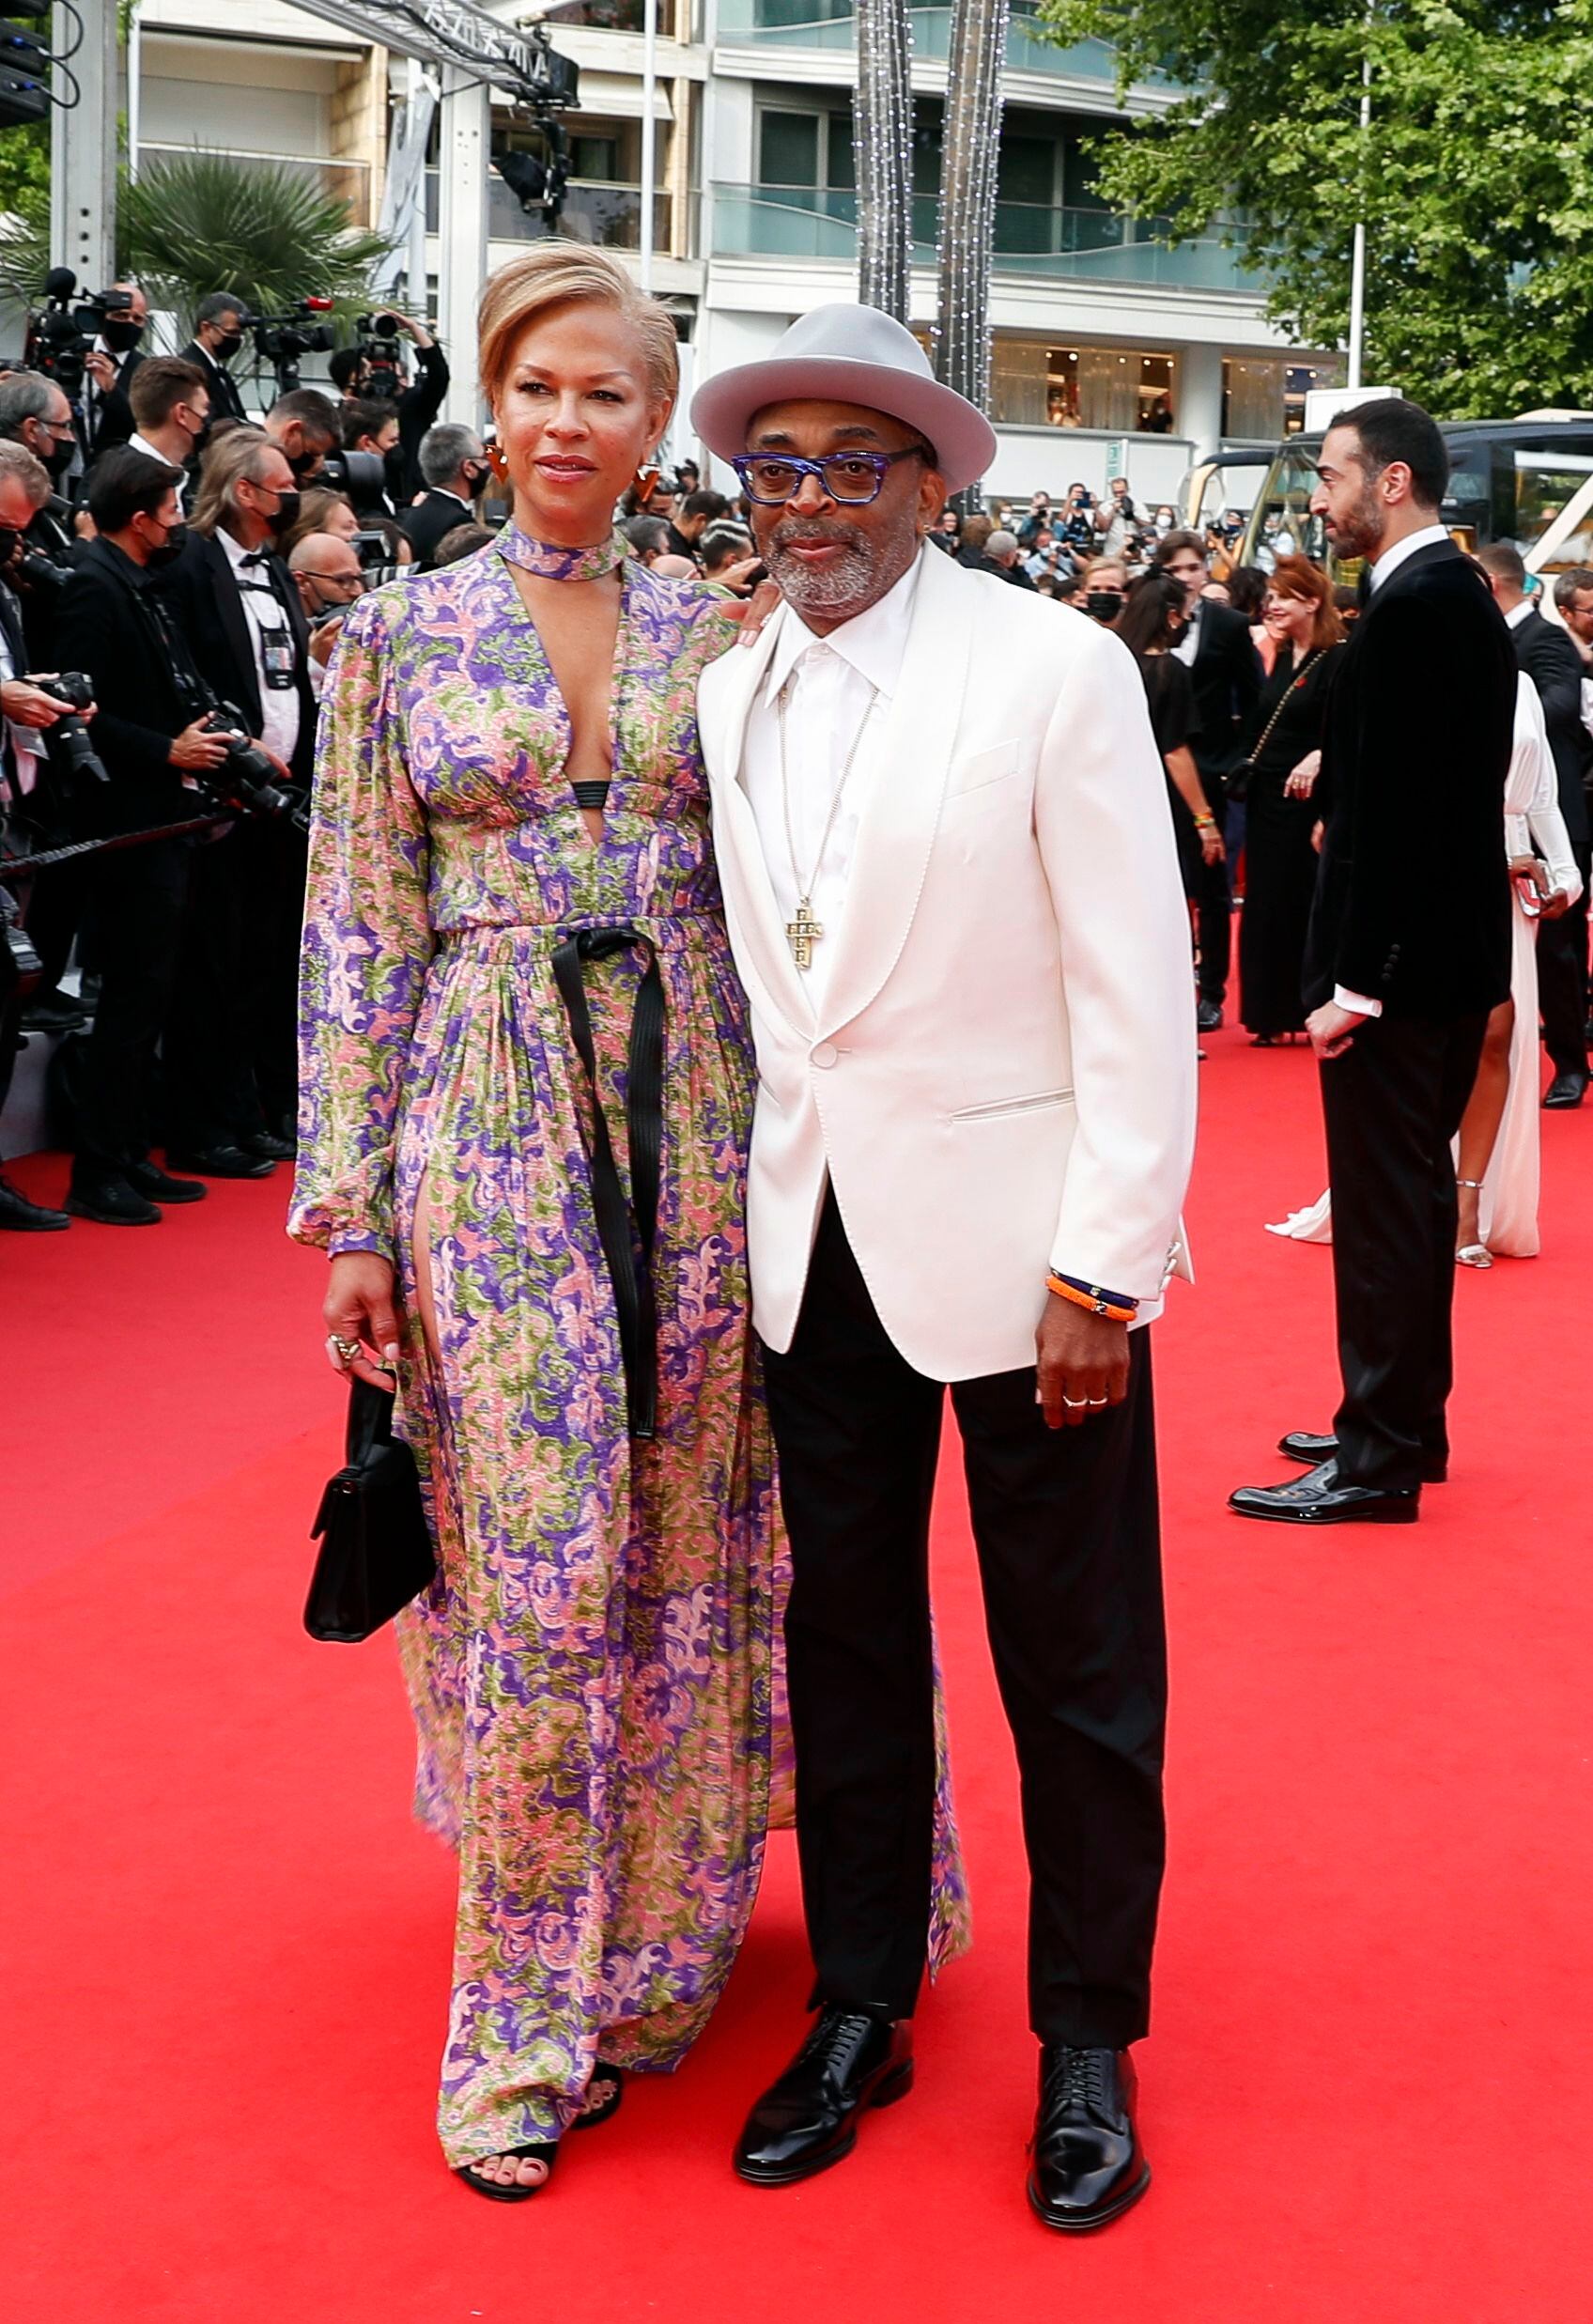 The Cannes Film Festival Rolls Out The Red Carpet After COVID-19